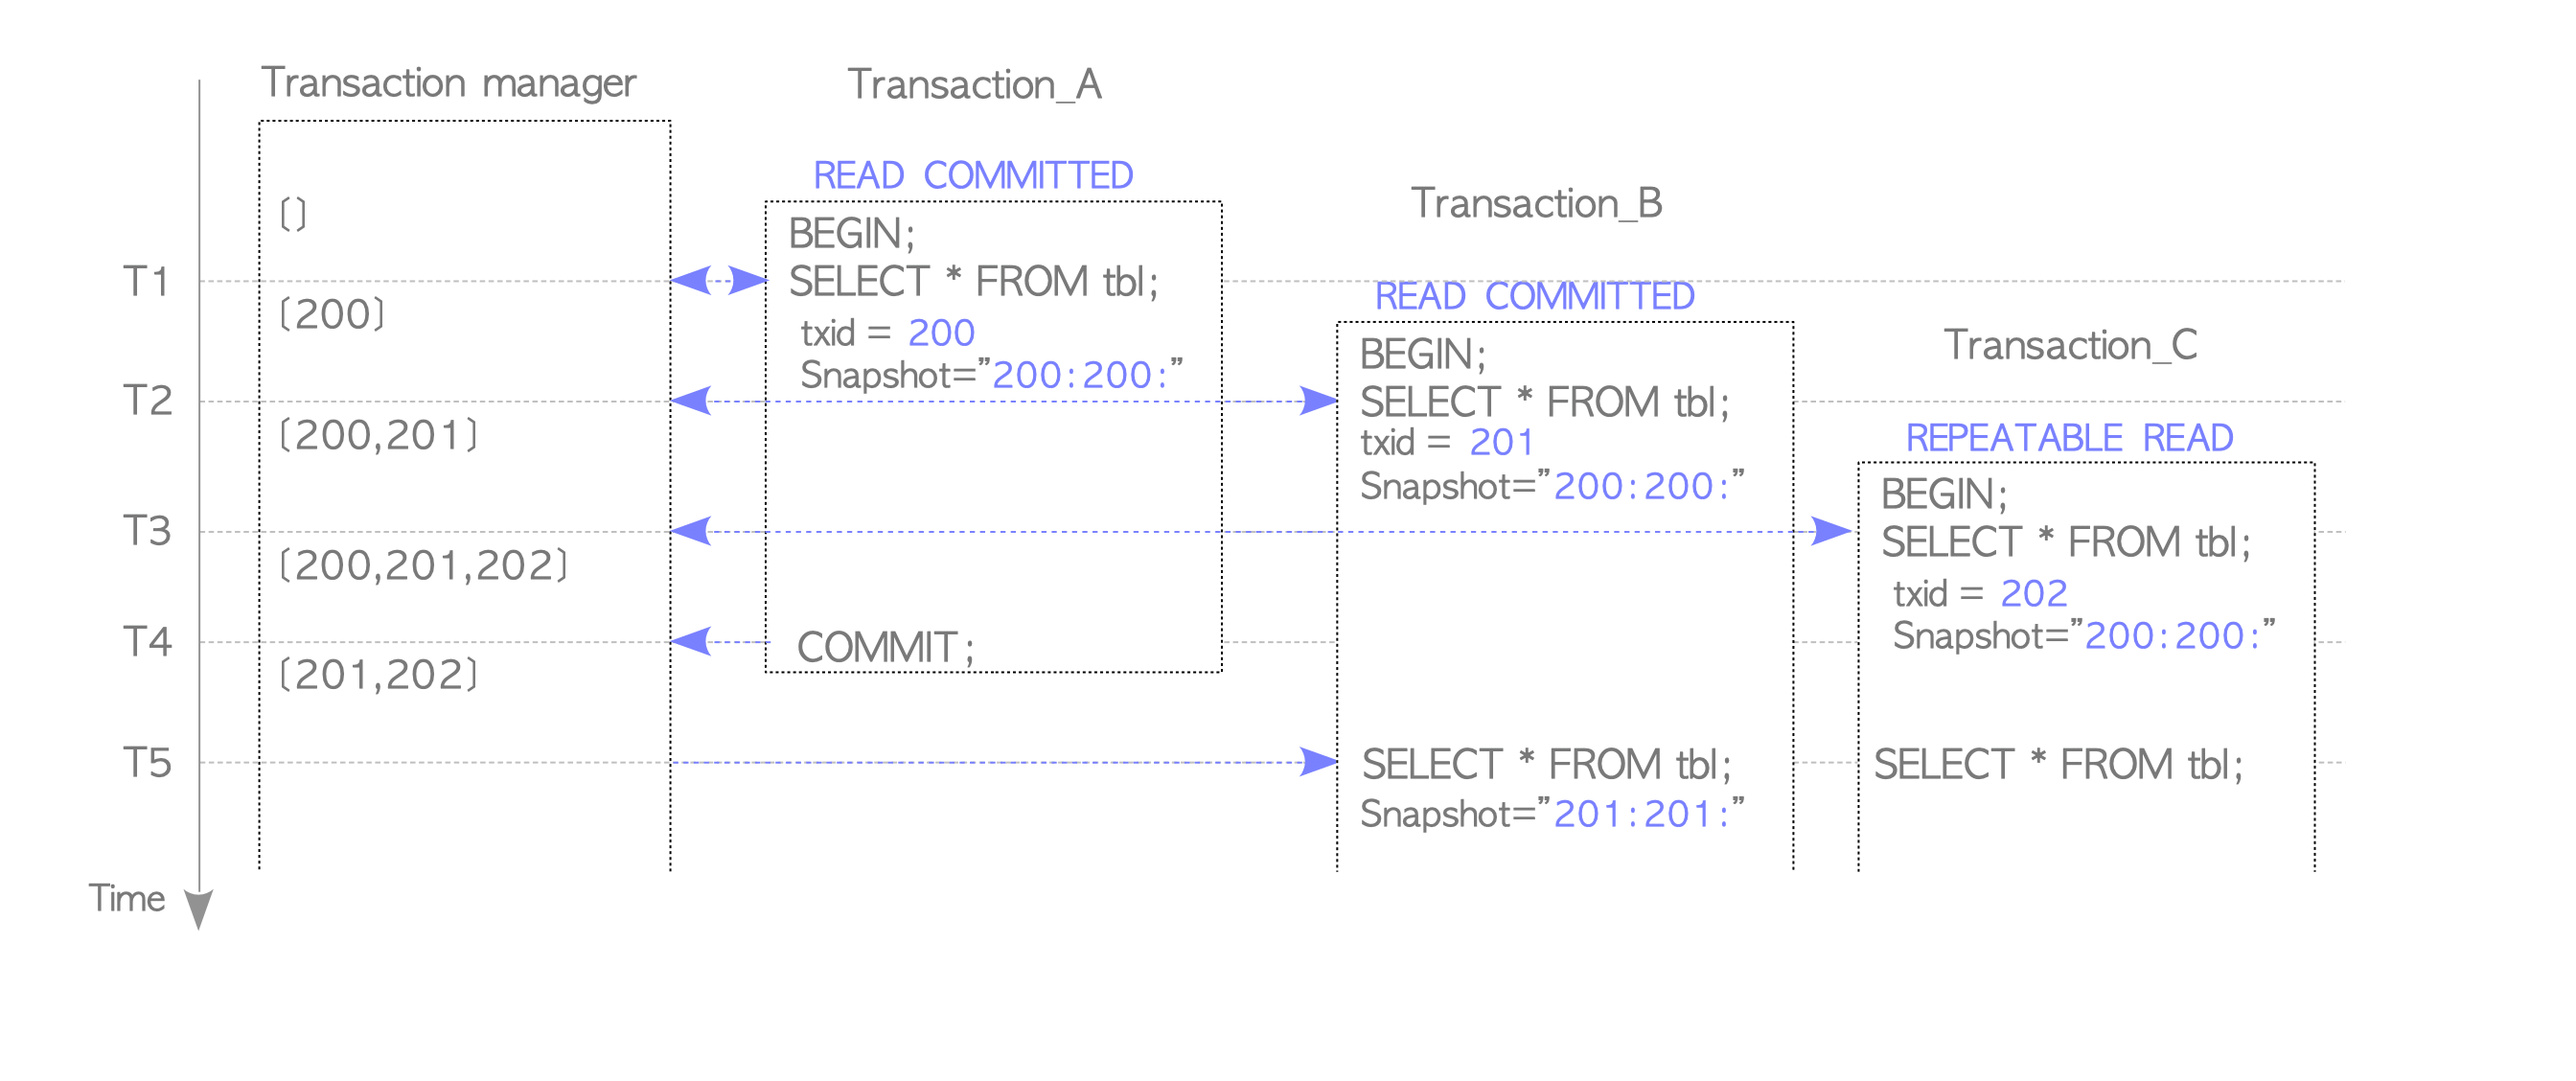 Transaction manager and transactions.